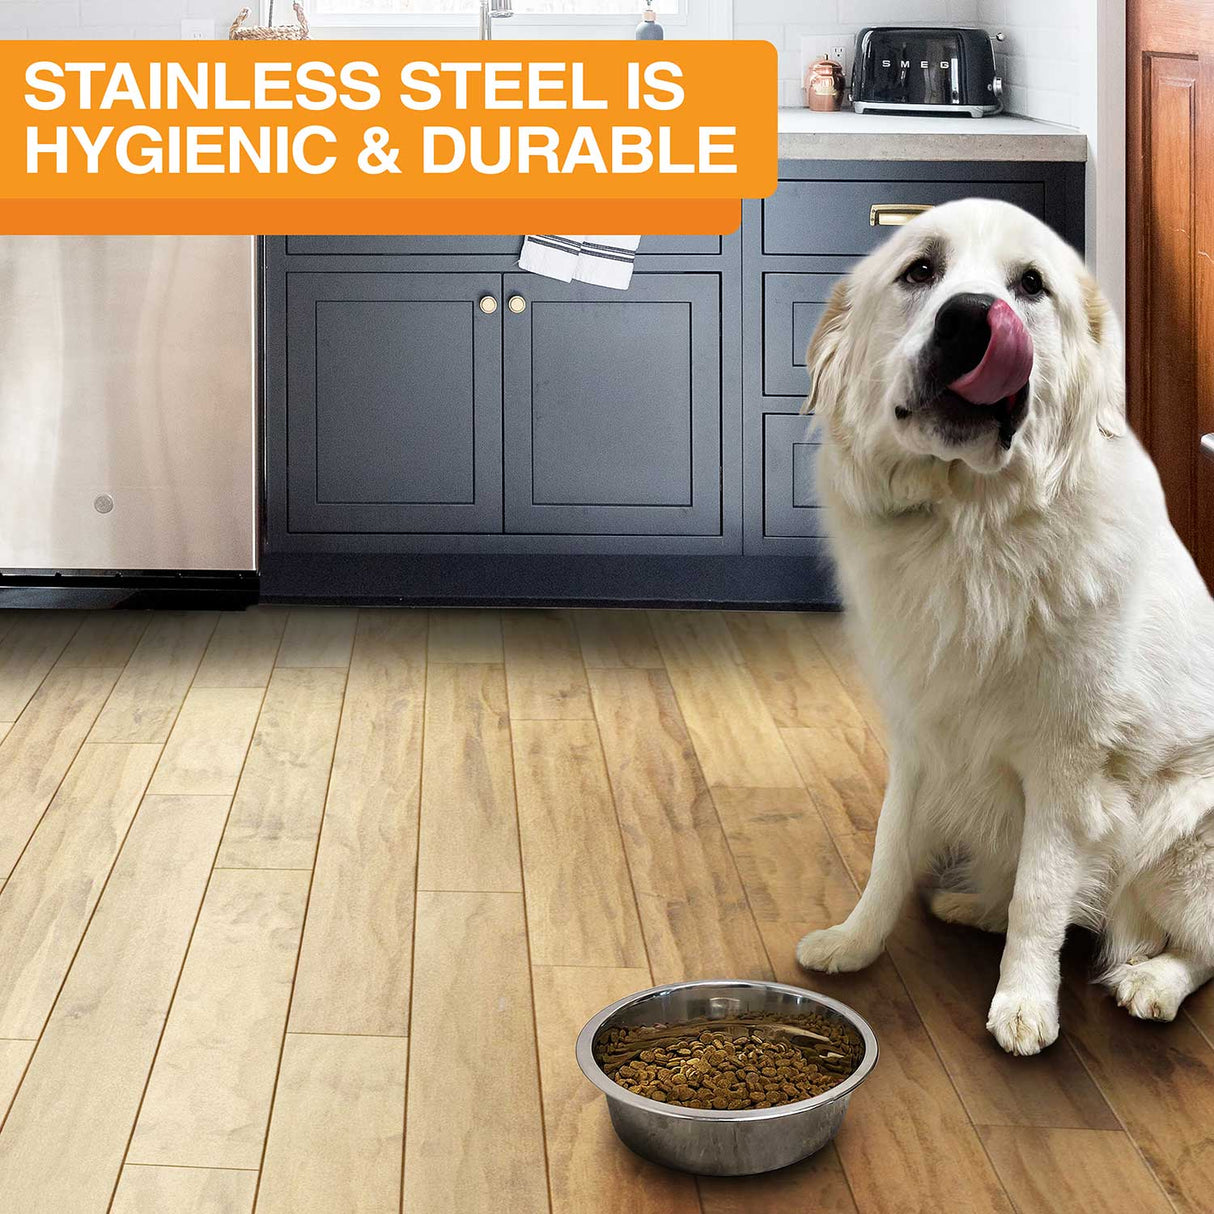 Stainless steel bowls are hygienic and durable